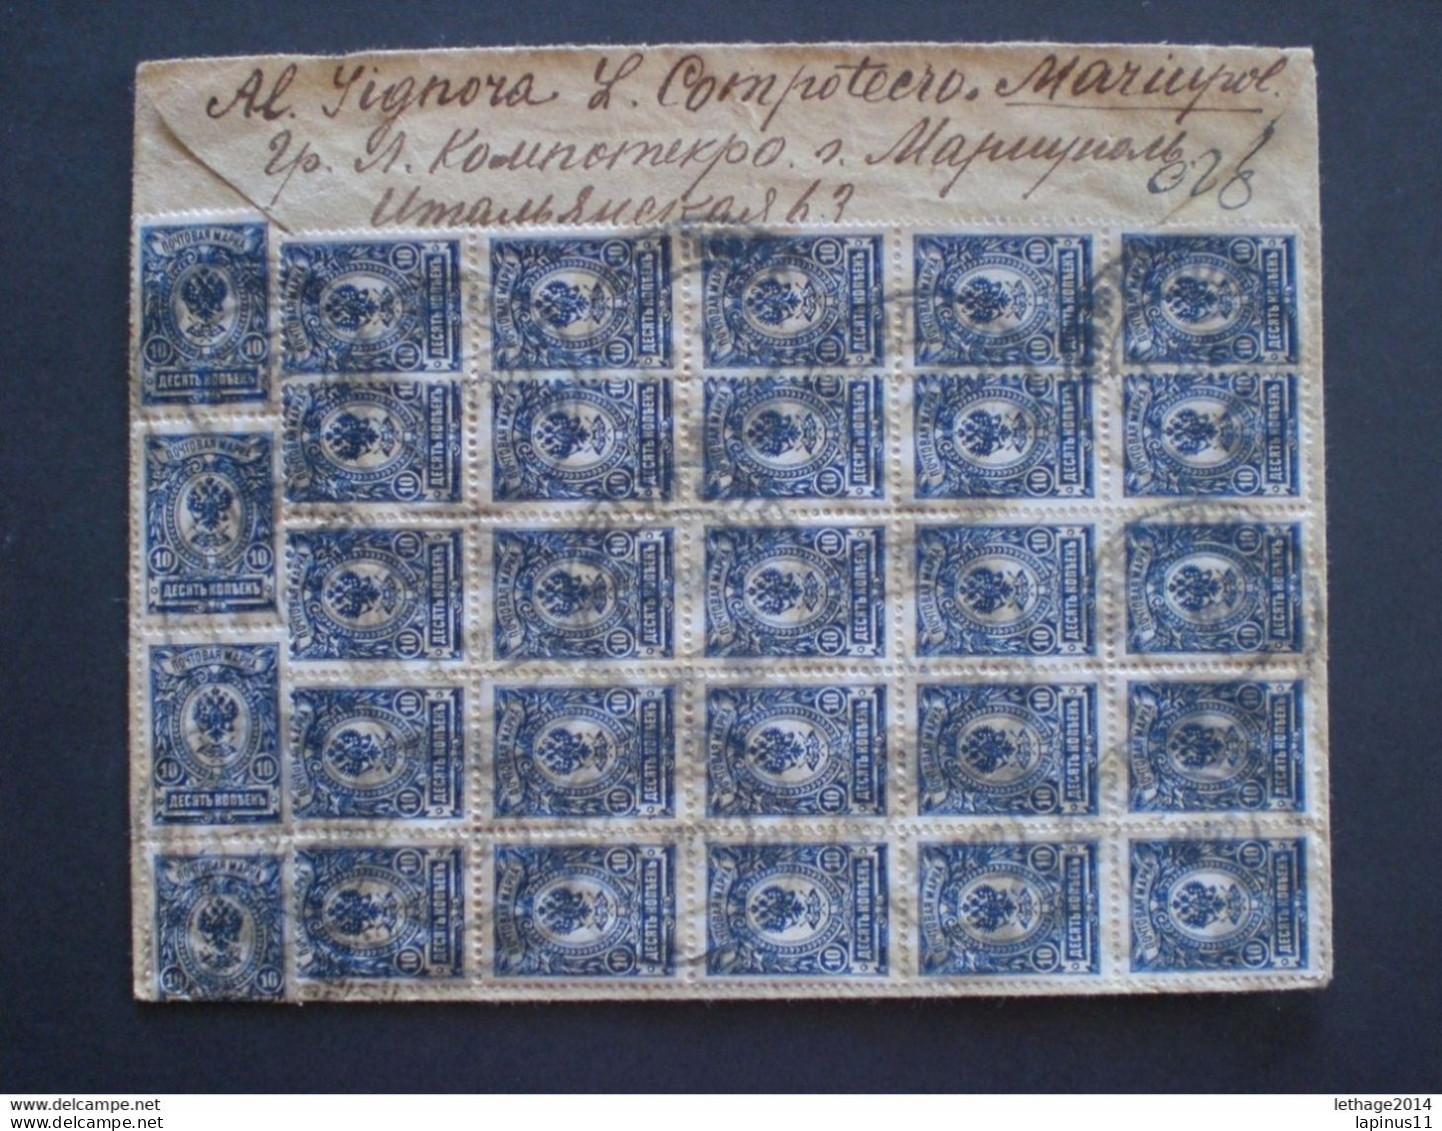 RUSSIA RUSSIE РОССИЯ STAMPS COVER 1923 Registered Mail RUSSIE TO ITALY MANY STAMPS FULL 30 STAMPS !! RRRRR RIF.TAGG.(2) - Storia Postale